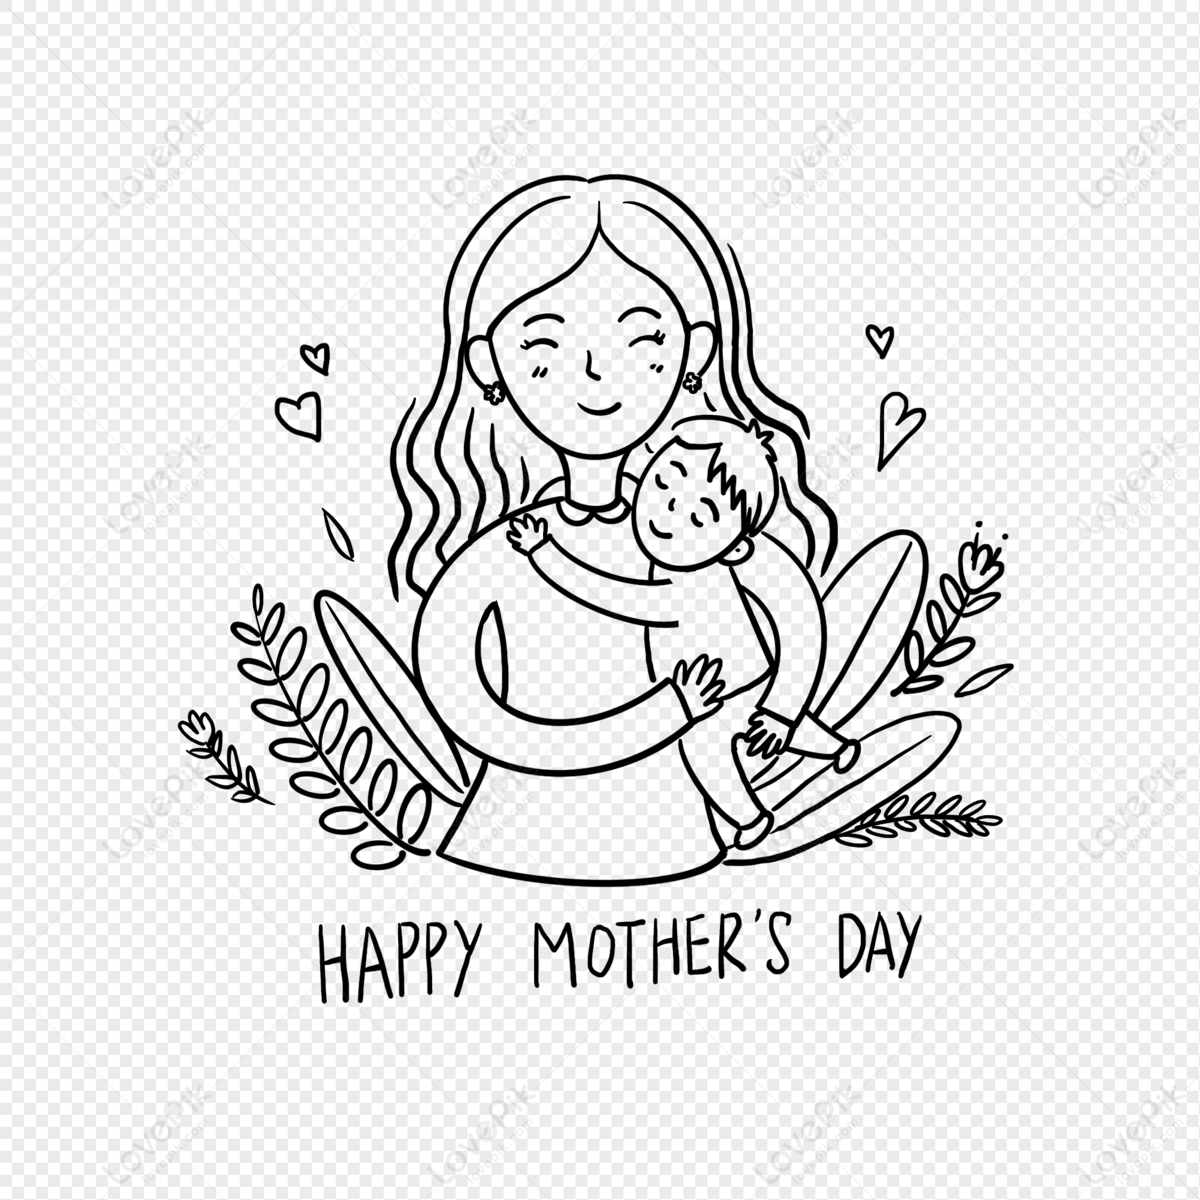 Mother's Day 2021 – Draw So Cute